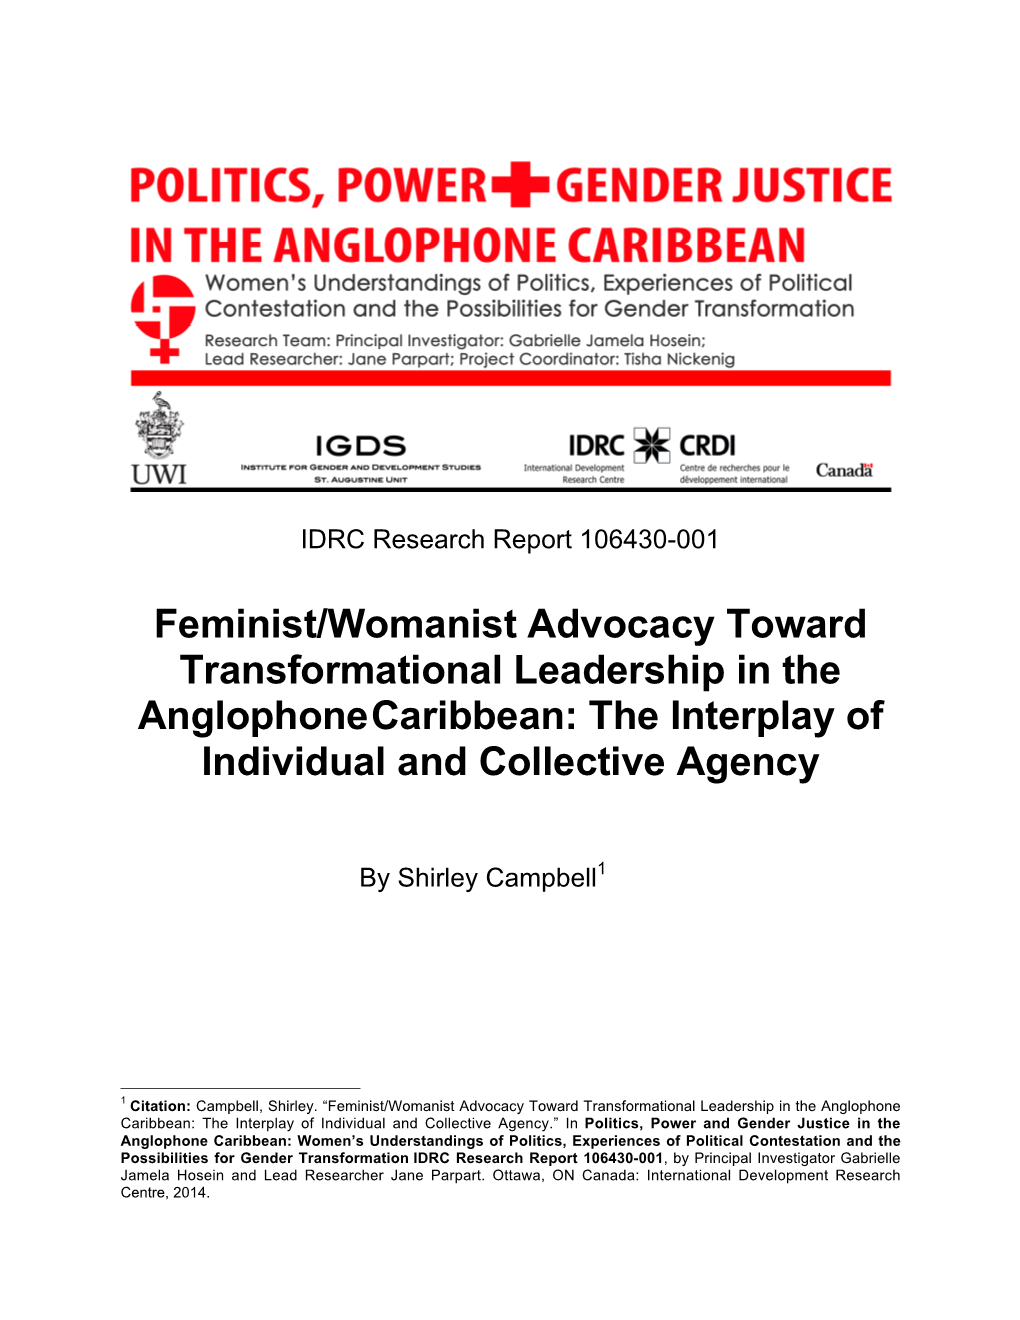 Feminist/Womanist Advocacy Toward Transformational Leadership in the Anglophonecaribbean: the Interplay of Individual and Collective Agency